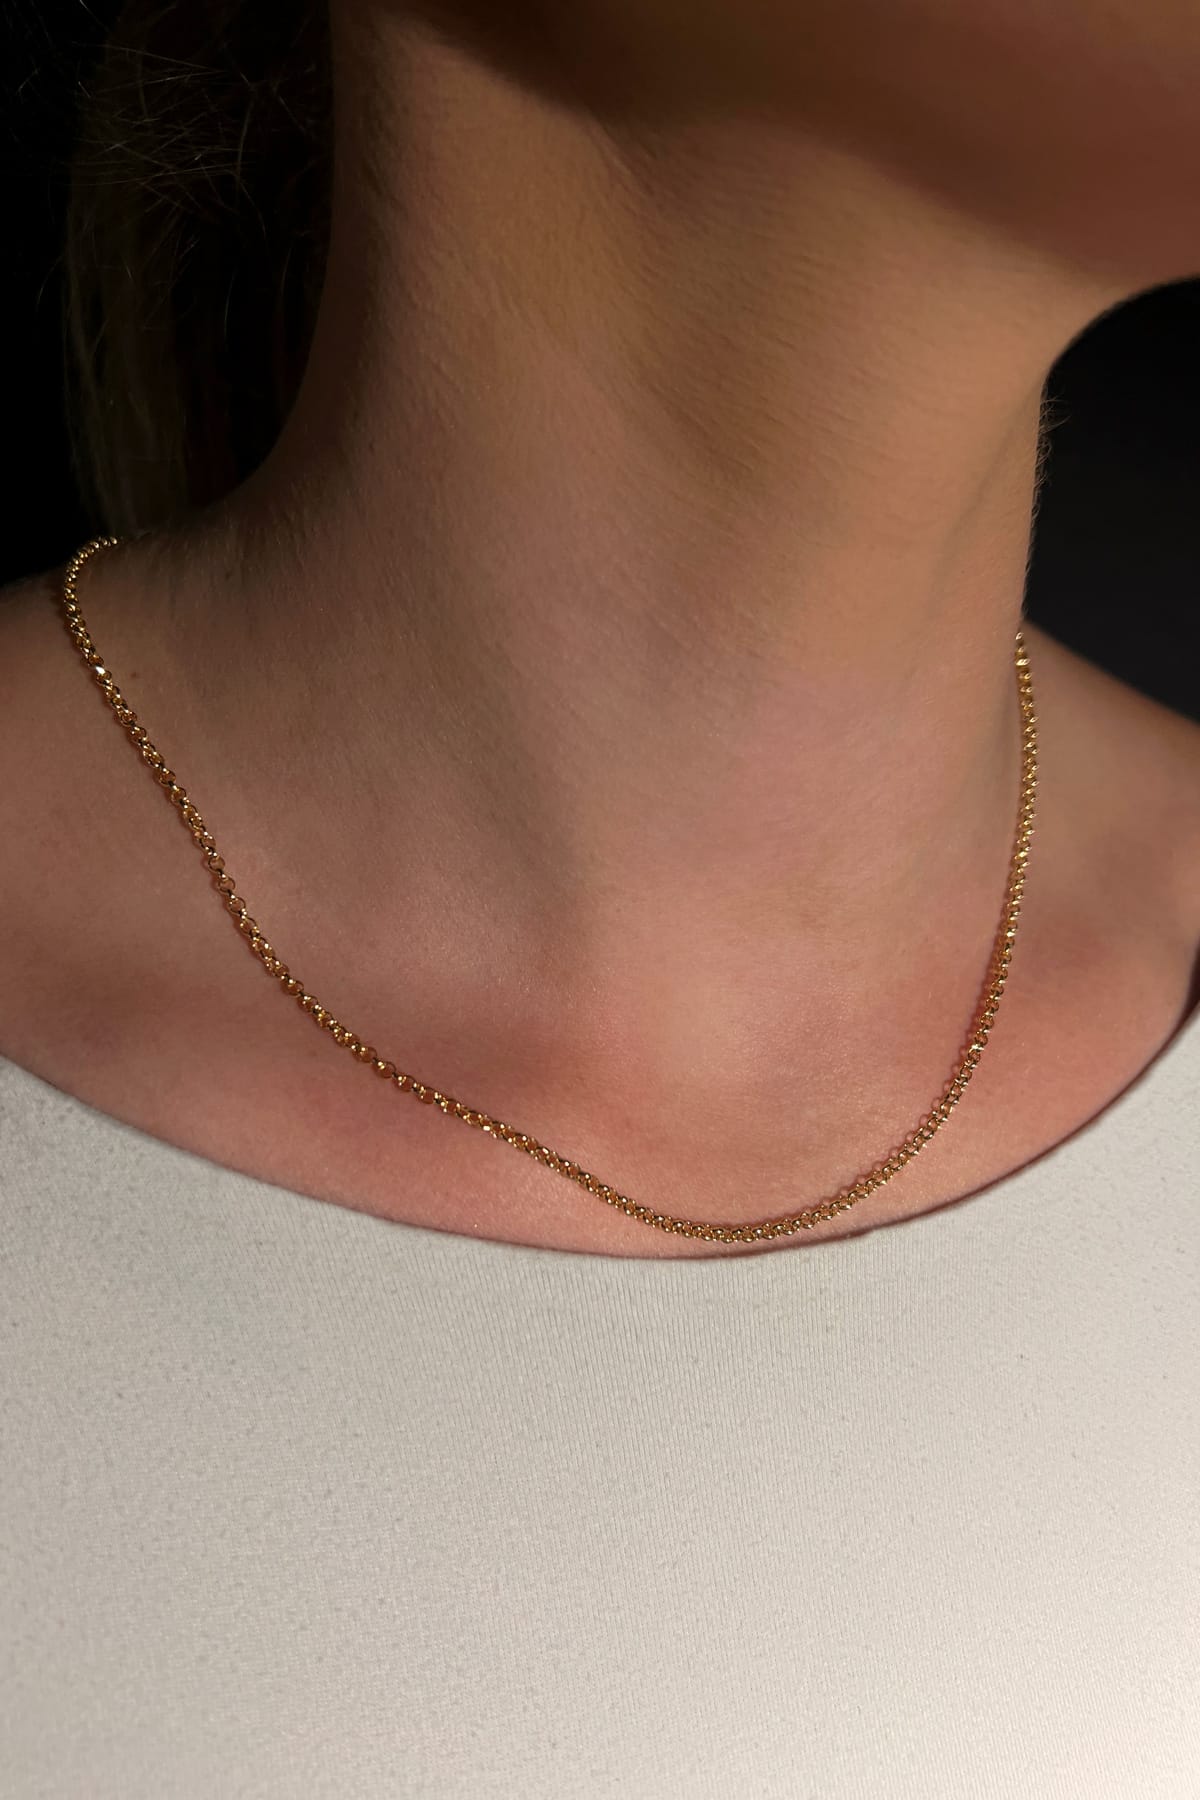 9 Carat Yellow Gold 50cm Round Belcher 2.6mm Chain available at LeGassick Diamonds and Jewellery Gold Coast, Australia.